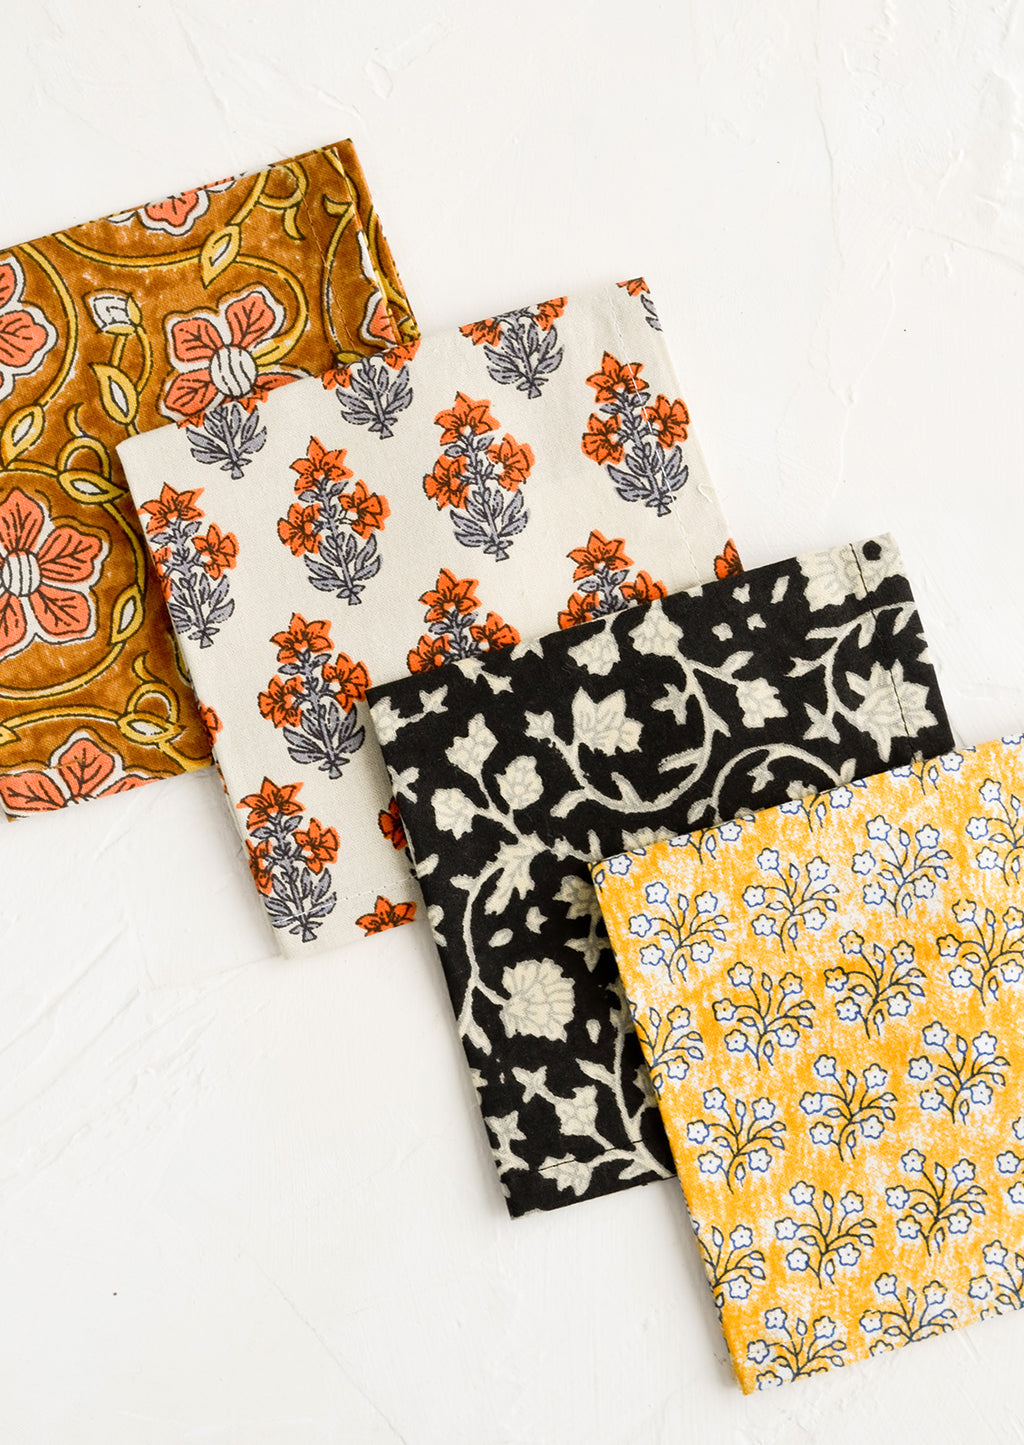 1: Four square fabric cocktail napkins in assorted colors and patterns.